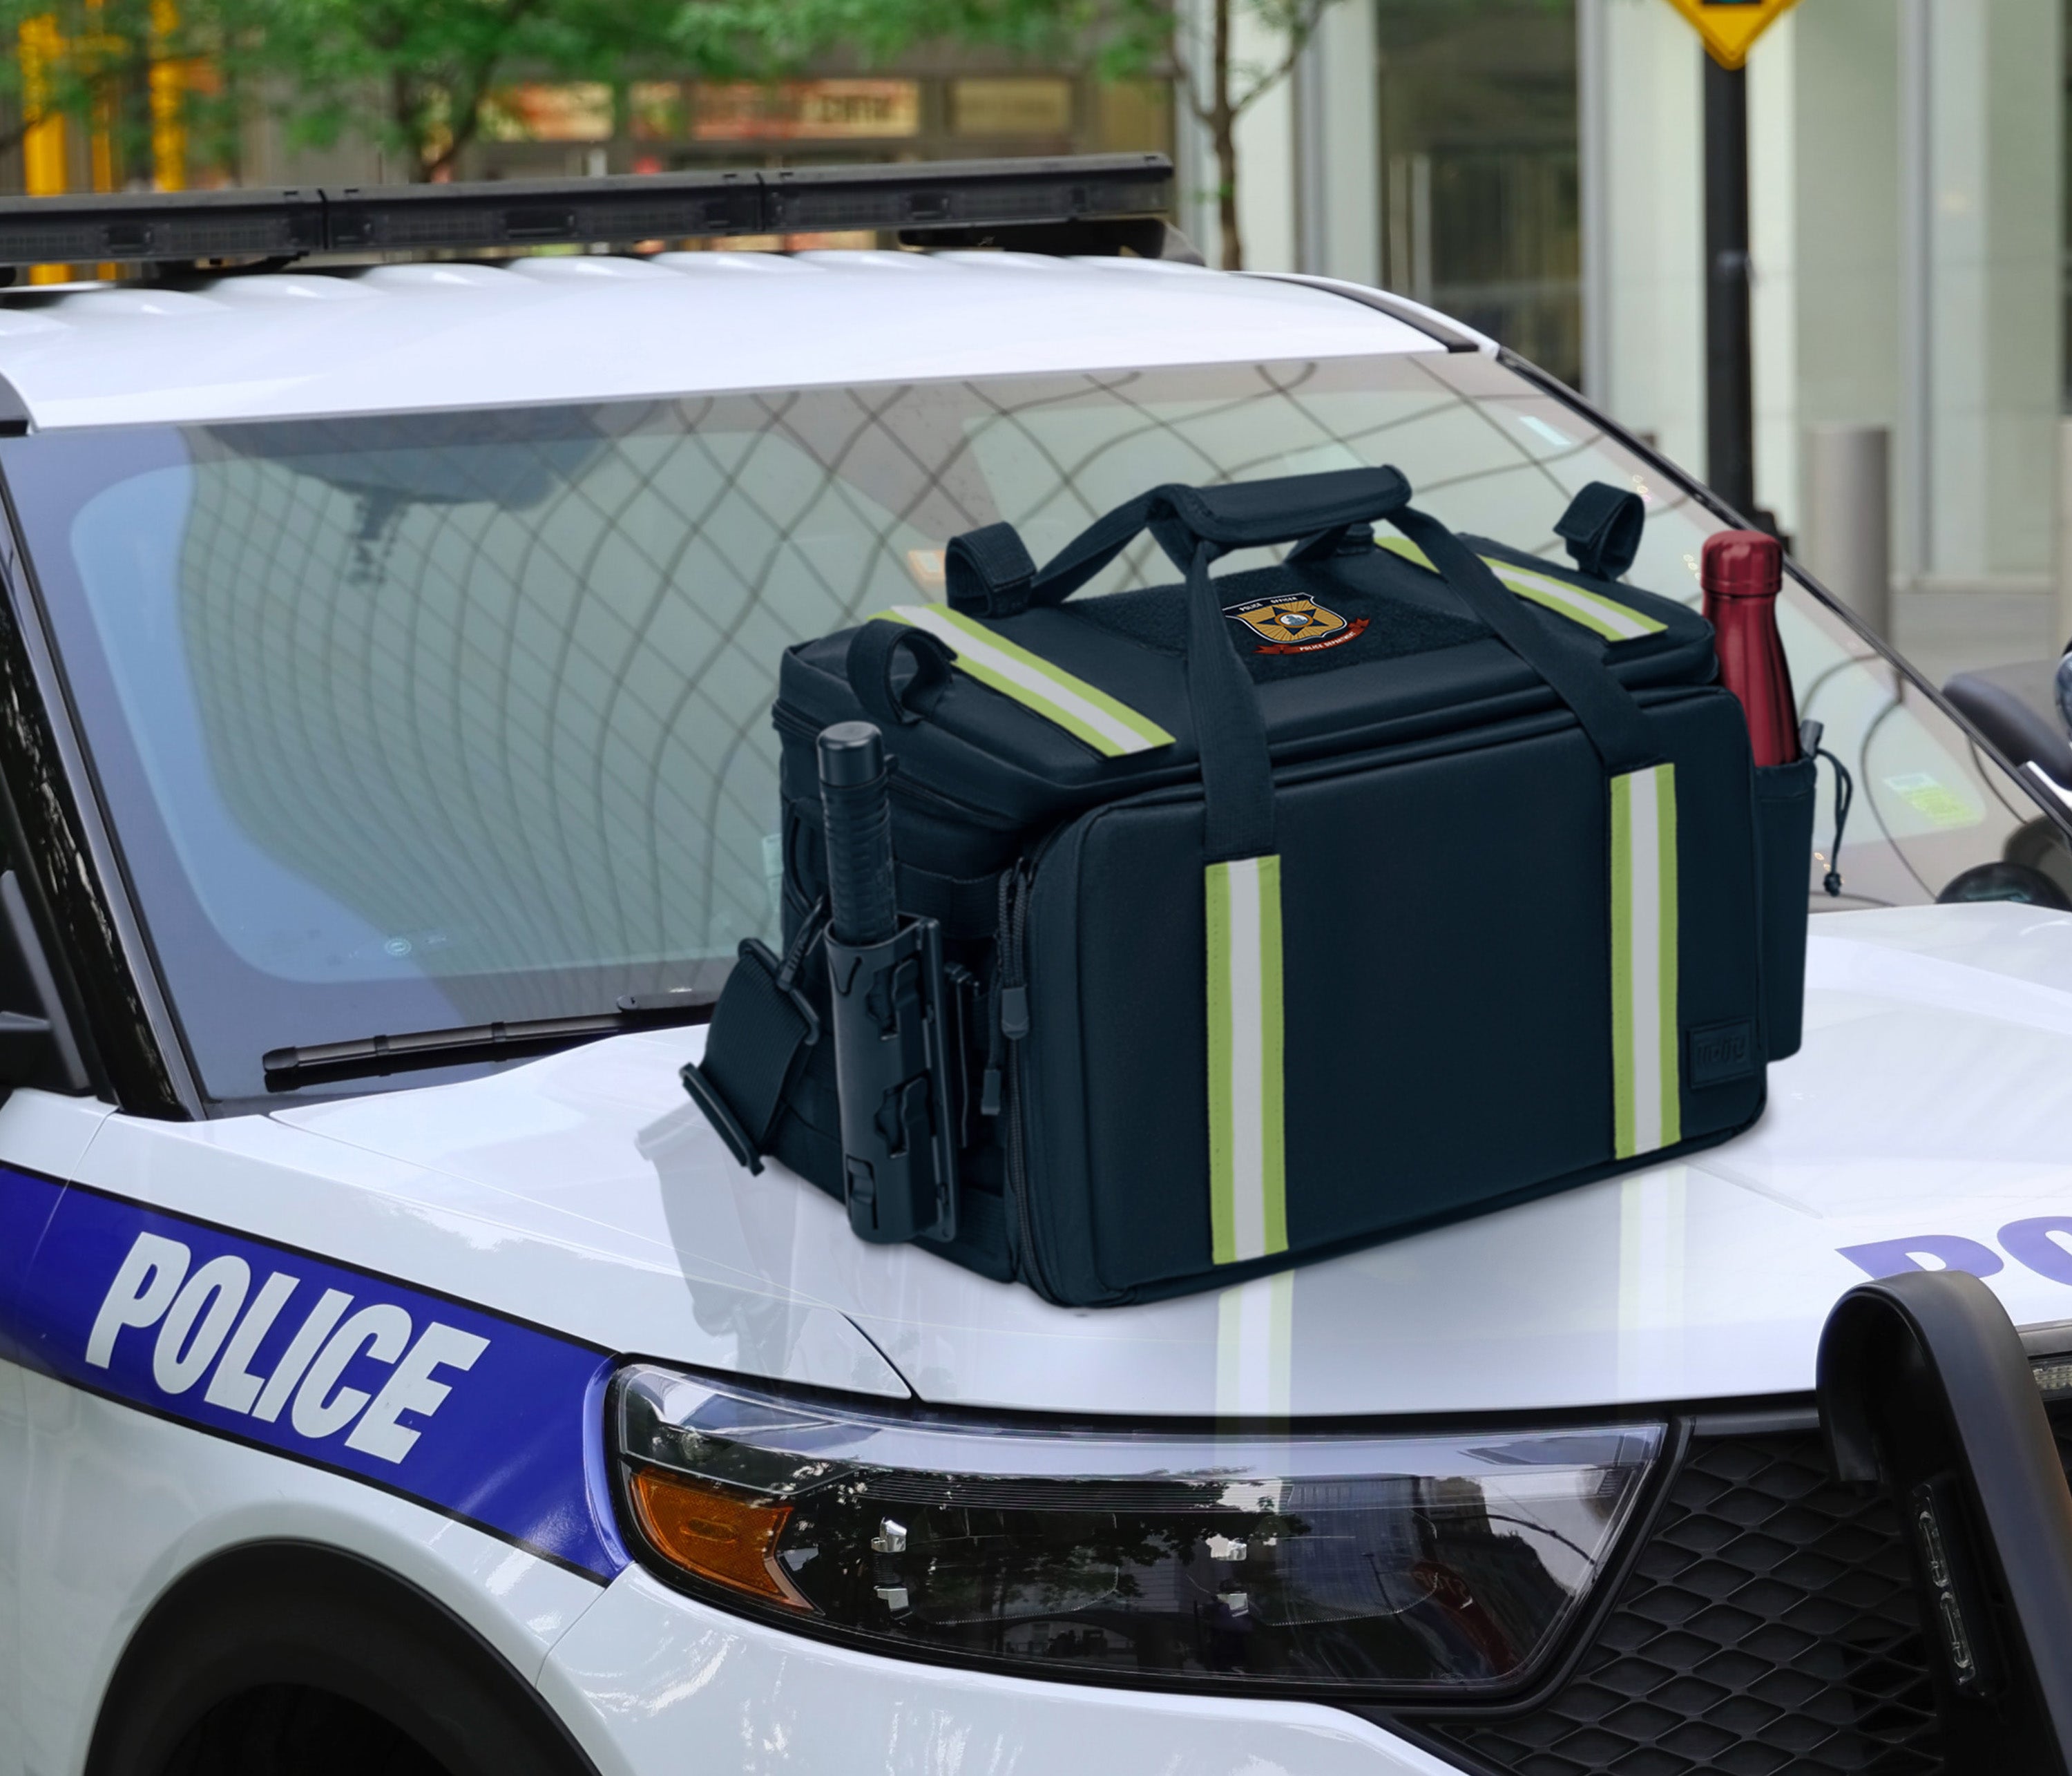 GlowGuard PATROL BAG FOR FIRST RESPONDERS